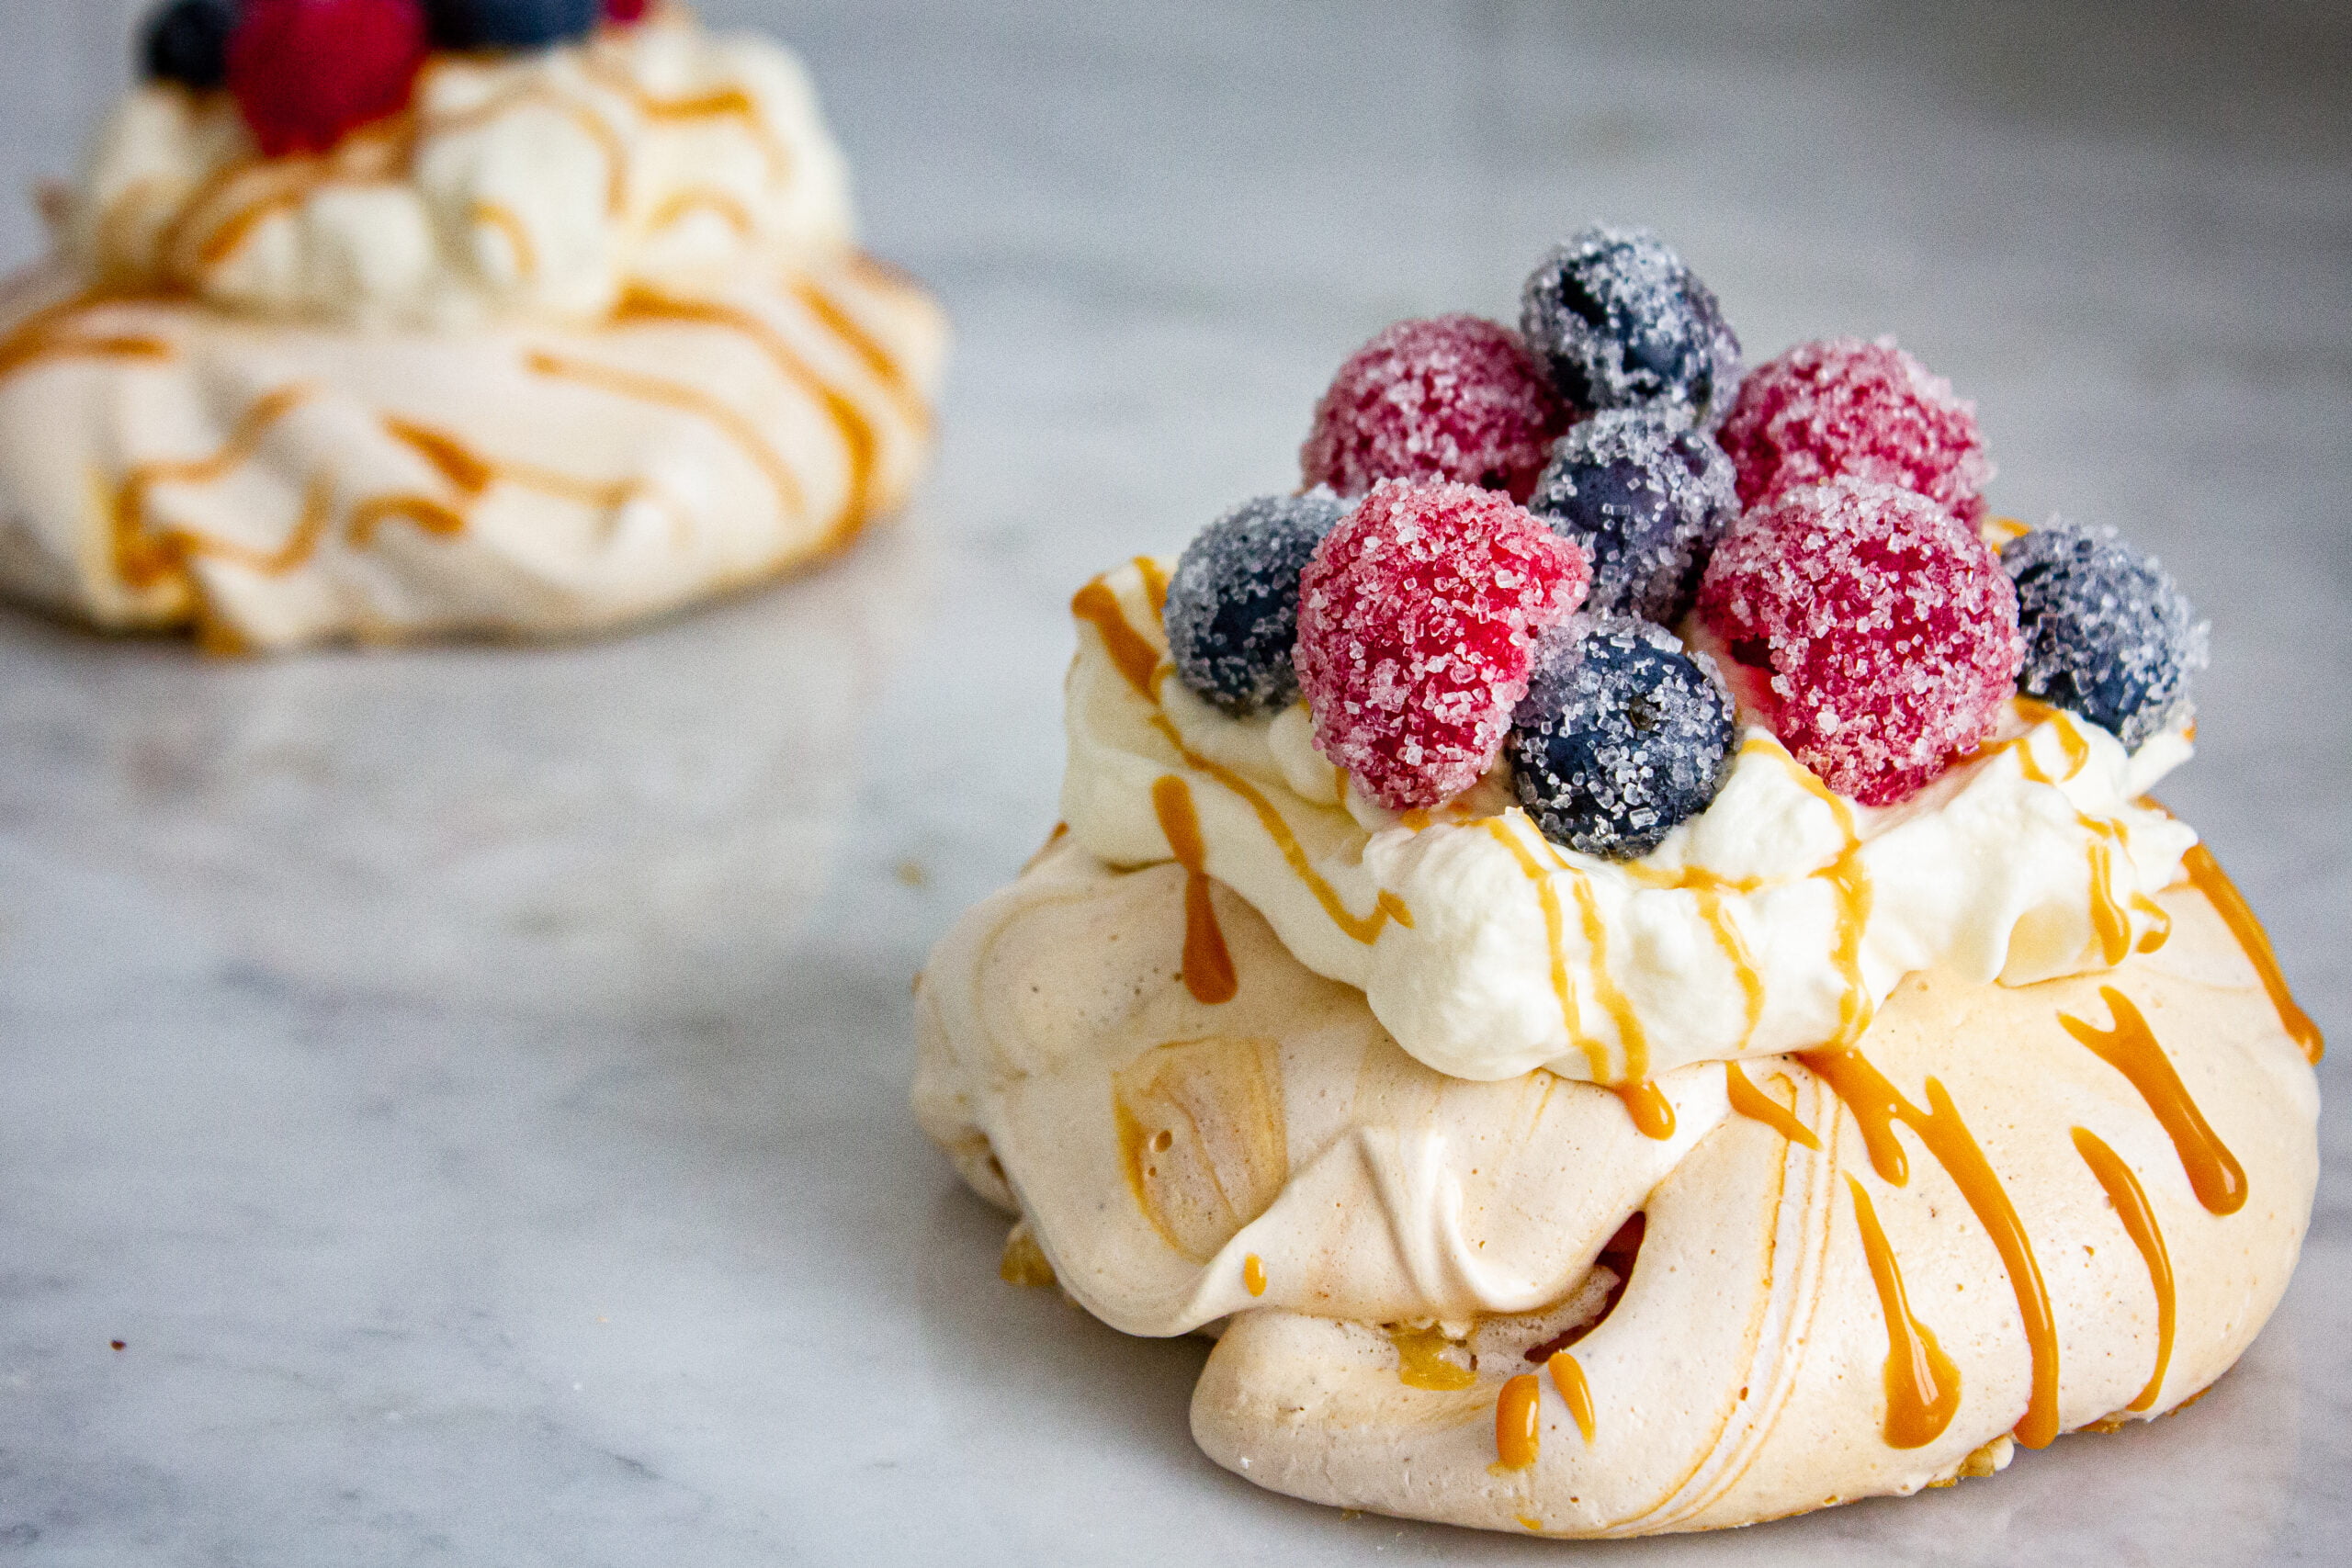 Pavlova with berries and dulce de leche